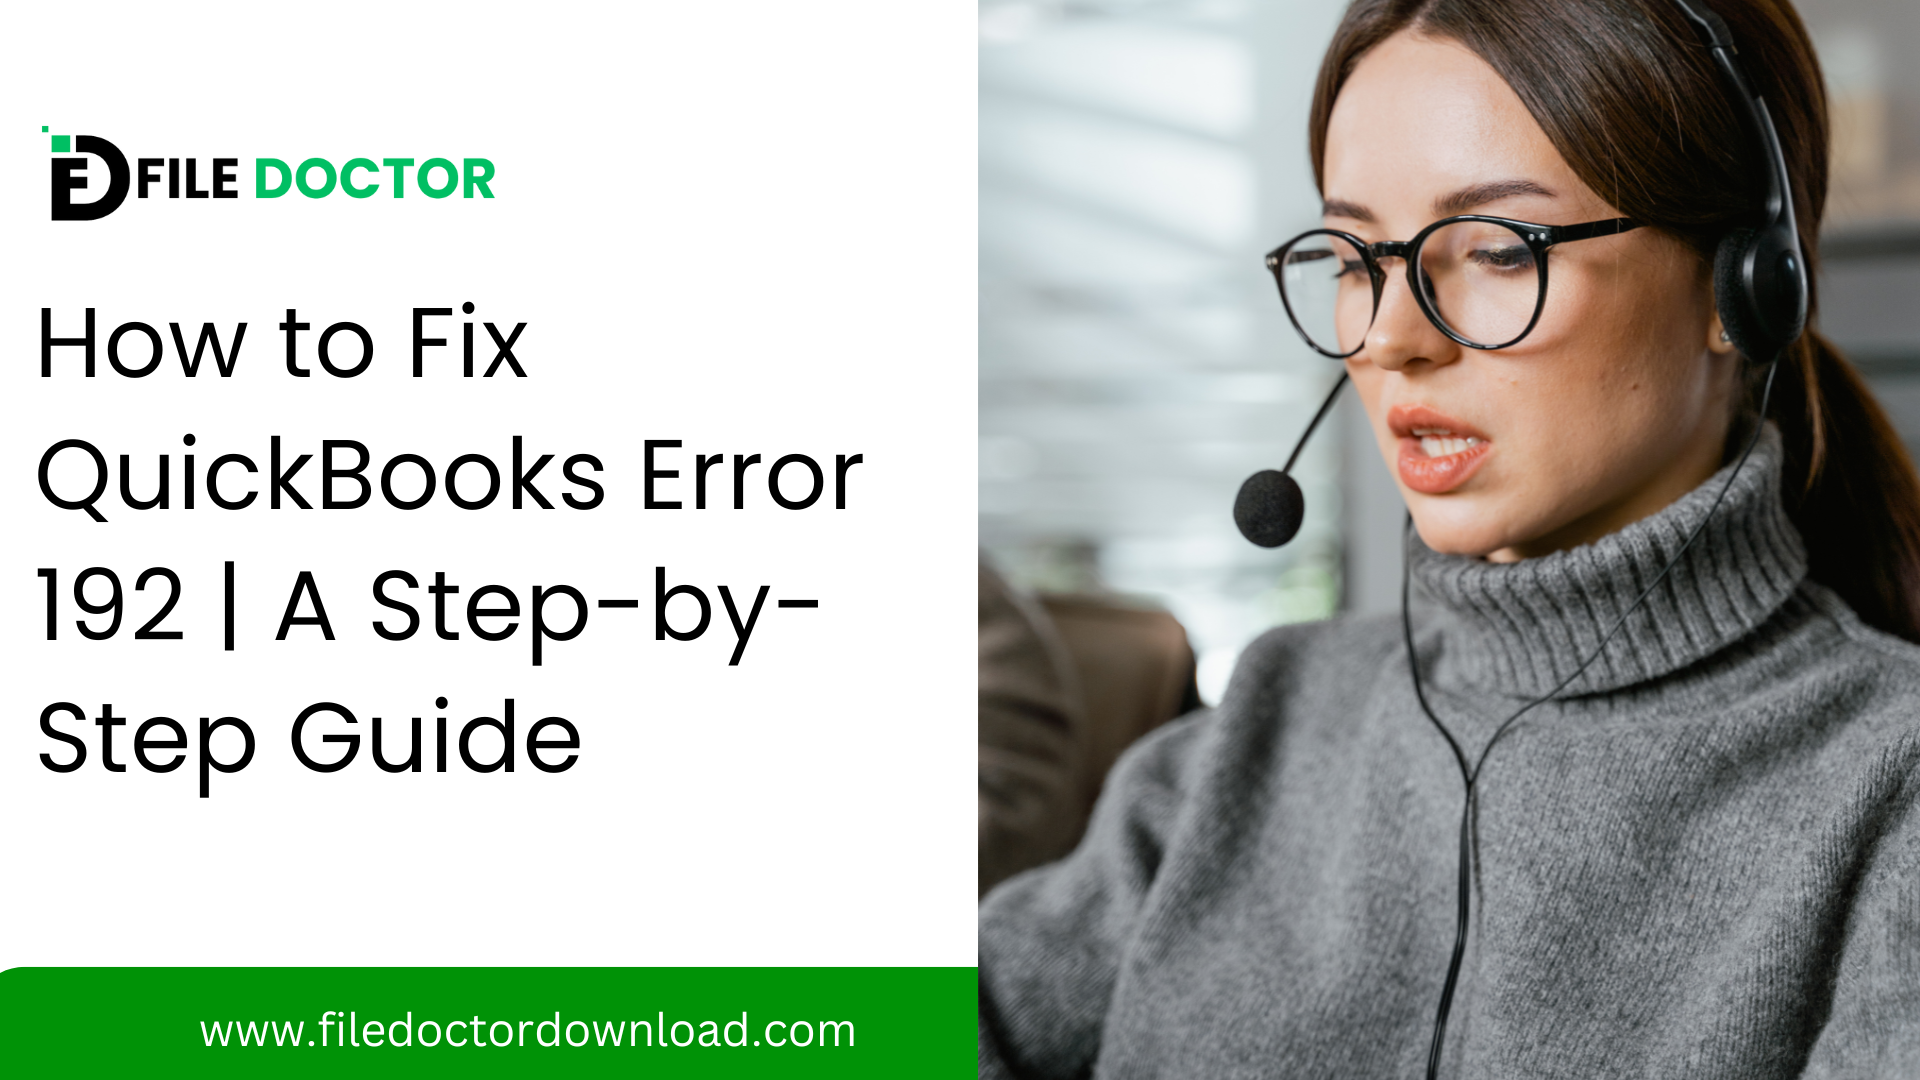 How to Fix QuickBooks Error 192 | A Step-by-Step Guide